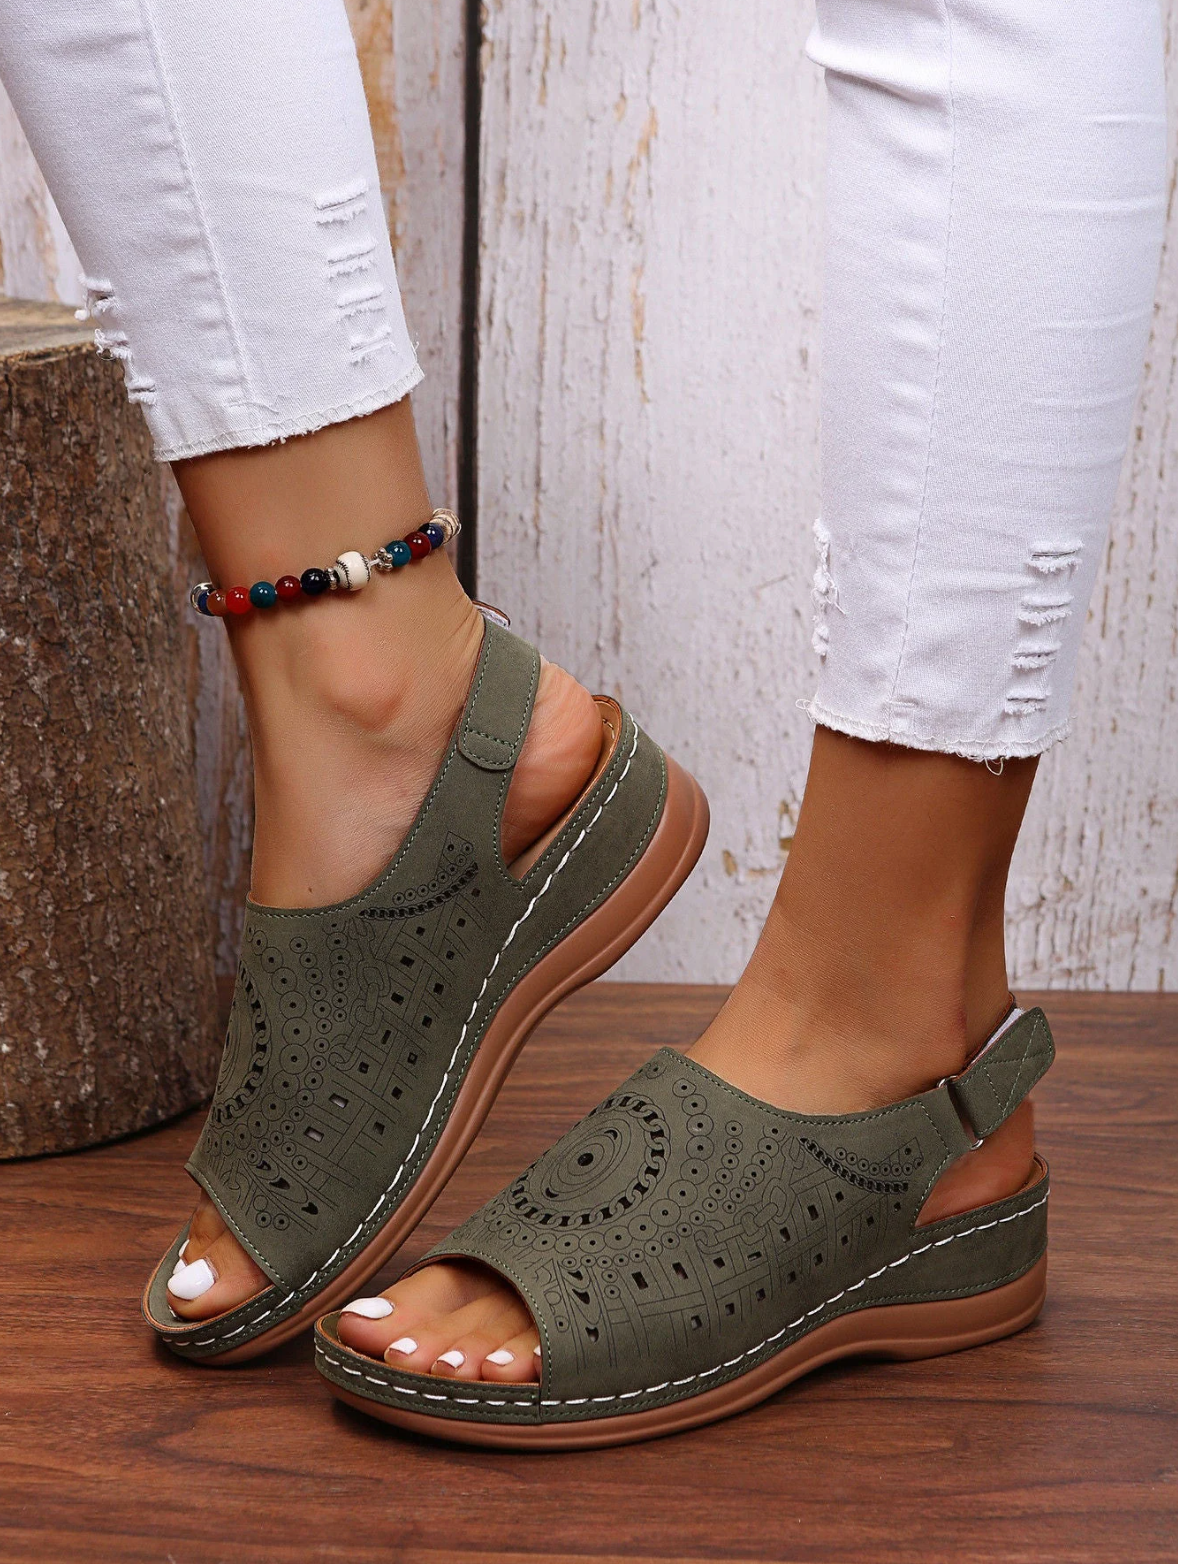 ORTHOPEDIC SANDALS - Chic and comfortable